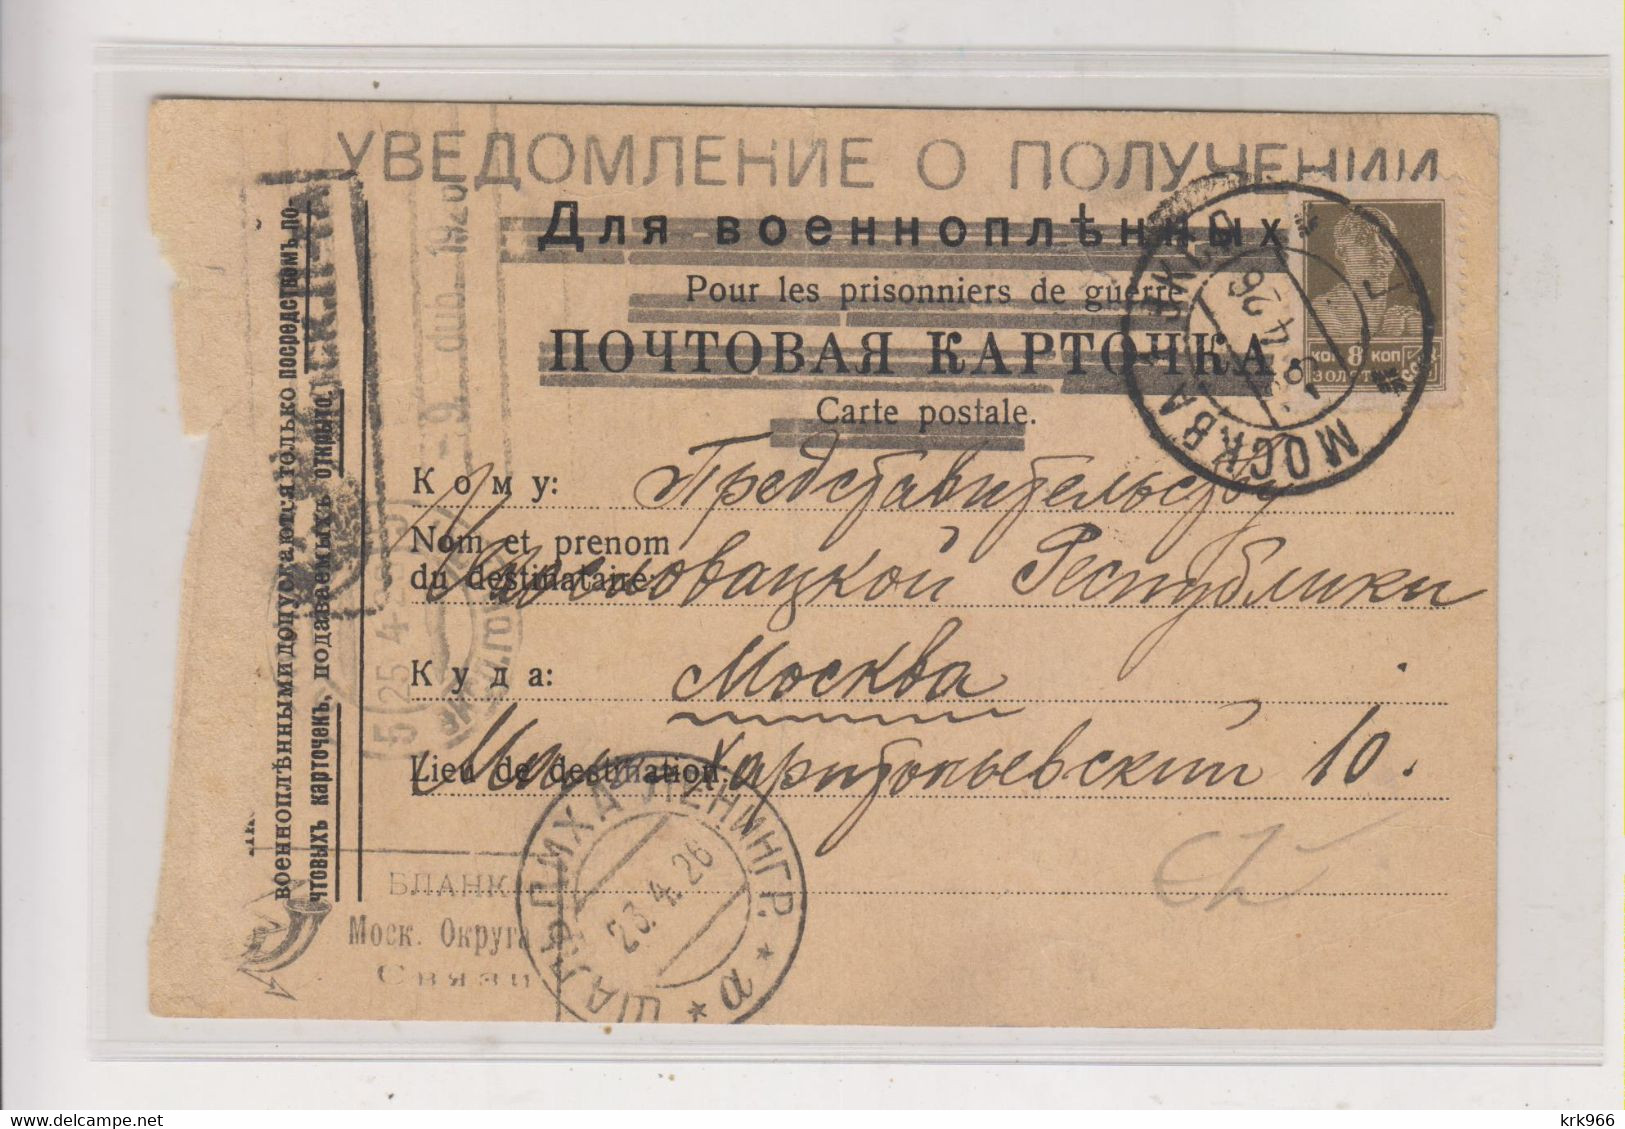 RUSSIA, 1926 MOSKVA MOSCOW  Nice Postcard - Lettres & Documents